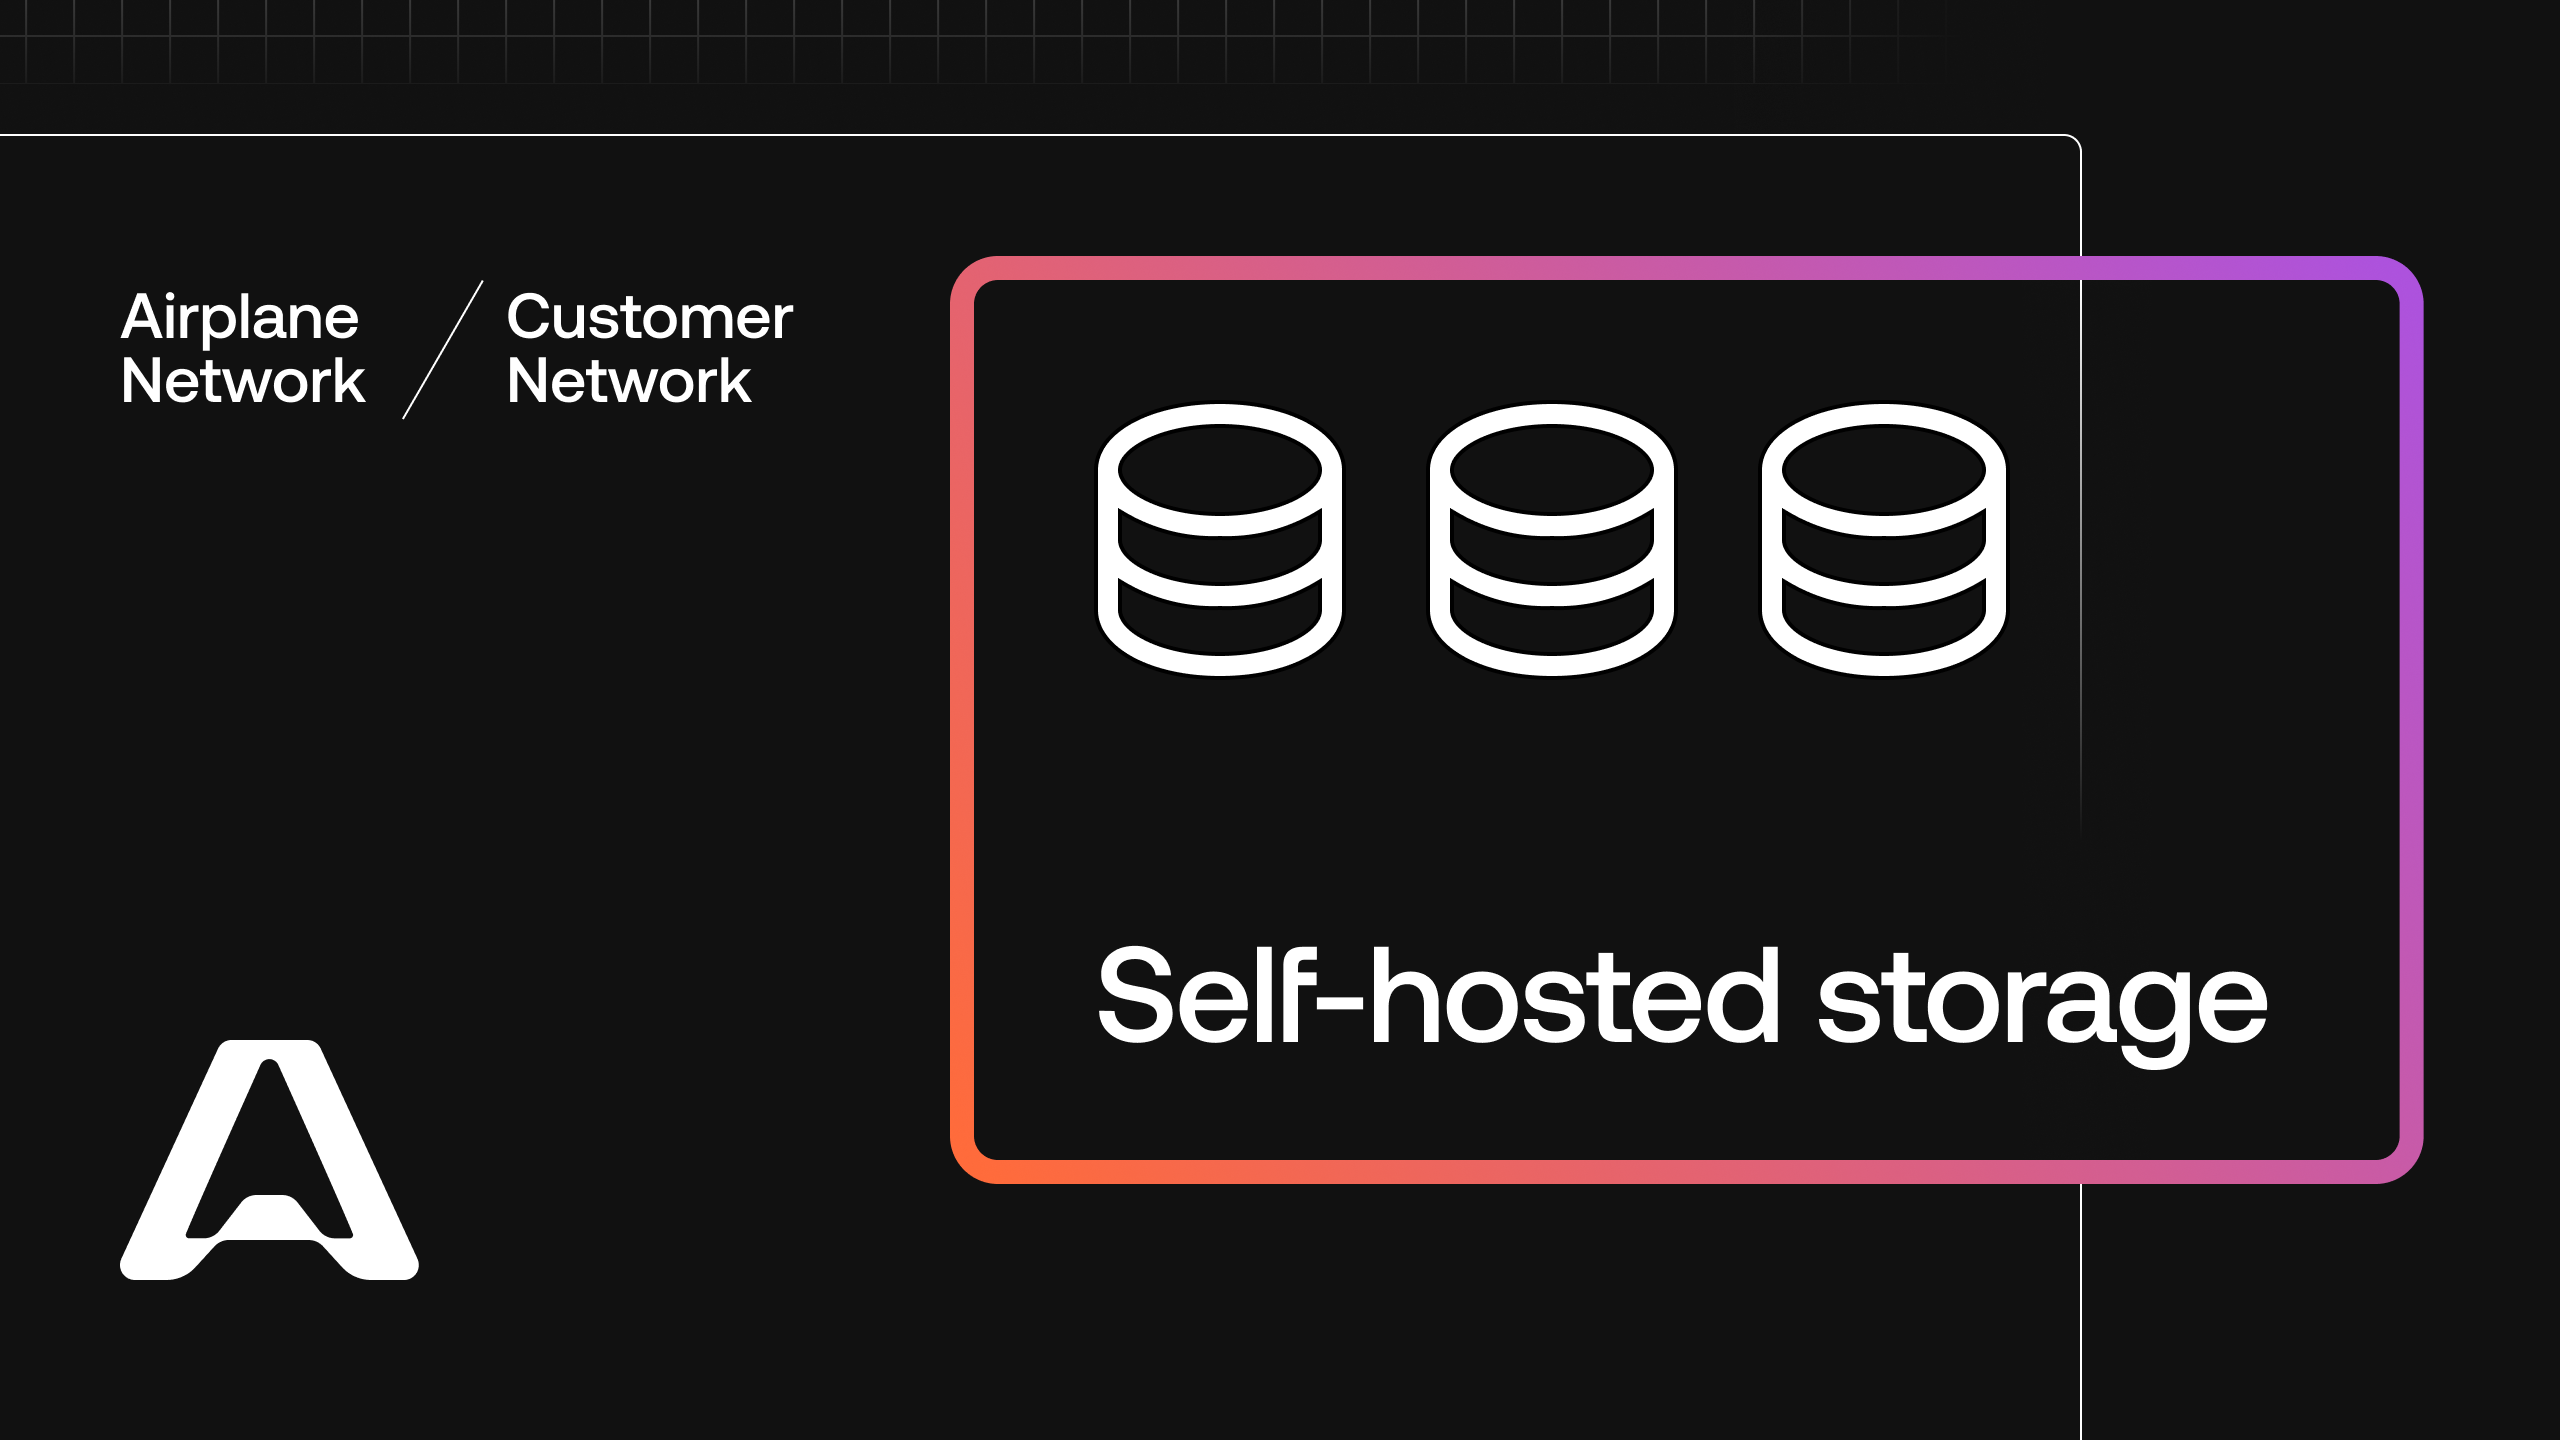 Introducing secure, self-hosted storage in Airplane